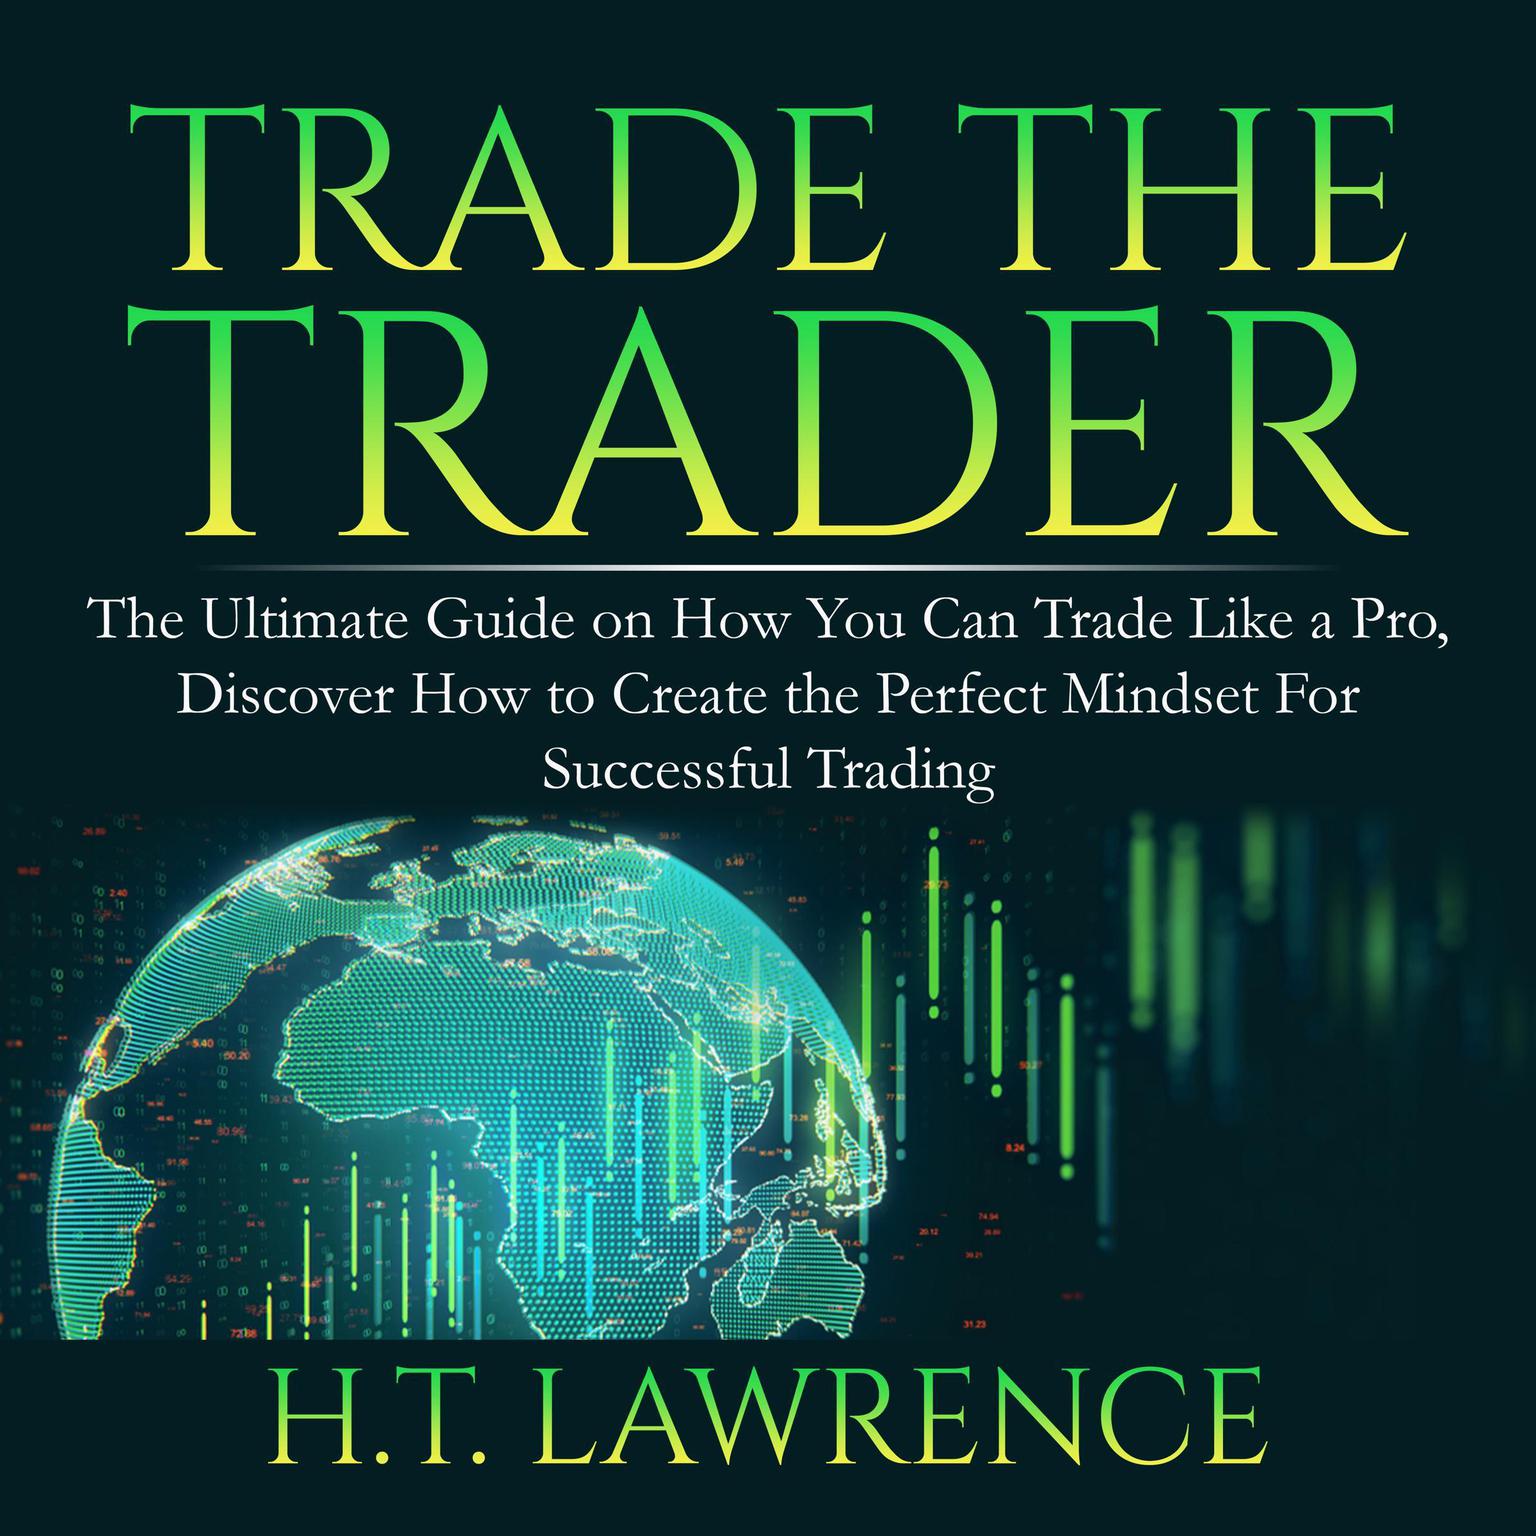 Trade the Trader: The Ultimate Guide on How You Can Trade Like a Pro, Discover How to Create the Perfect Mindset For Successful Trading: The Ultimate Guide on How You Can Trade Like a Pro, Discover How to Create the Perfect Mindset For Successful Trading  Audiobook, by H.T. Lawrence